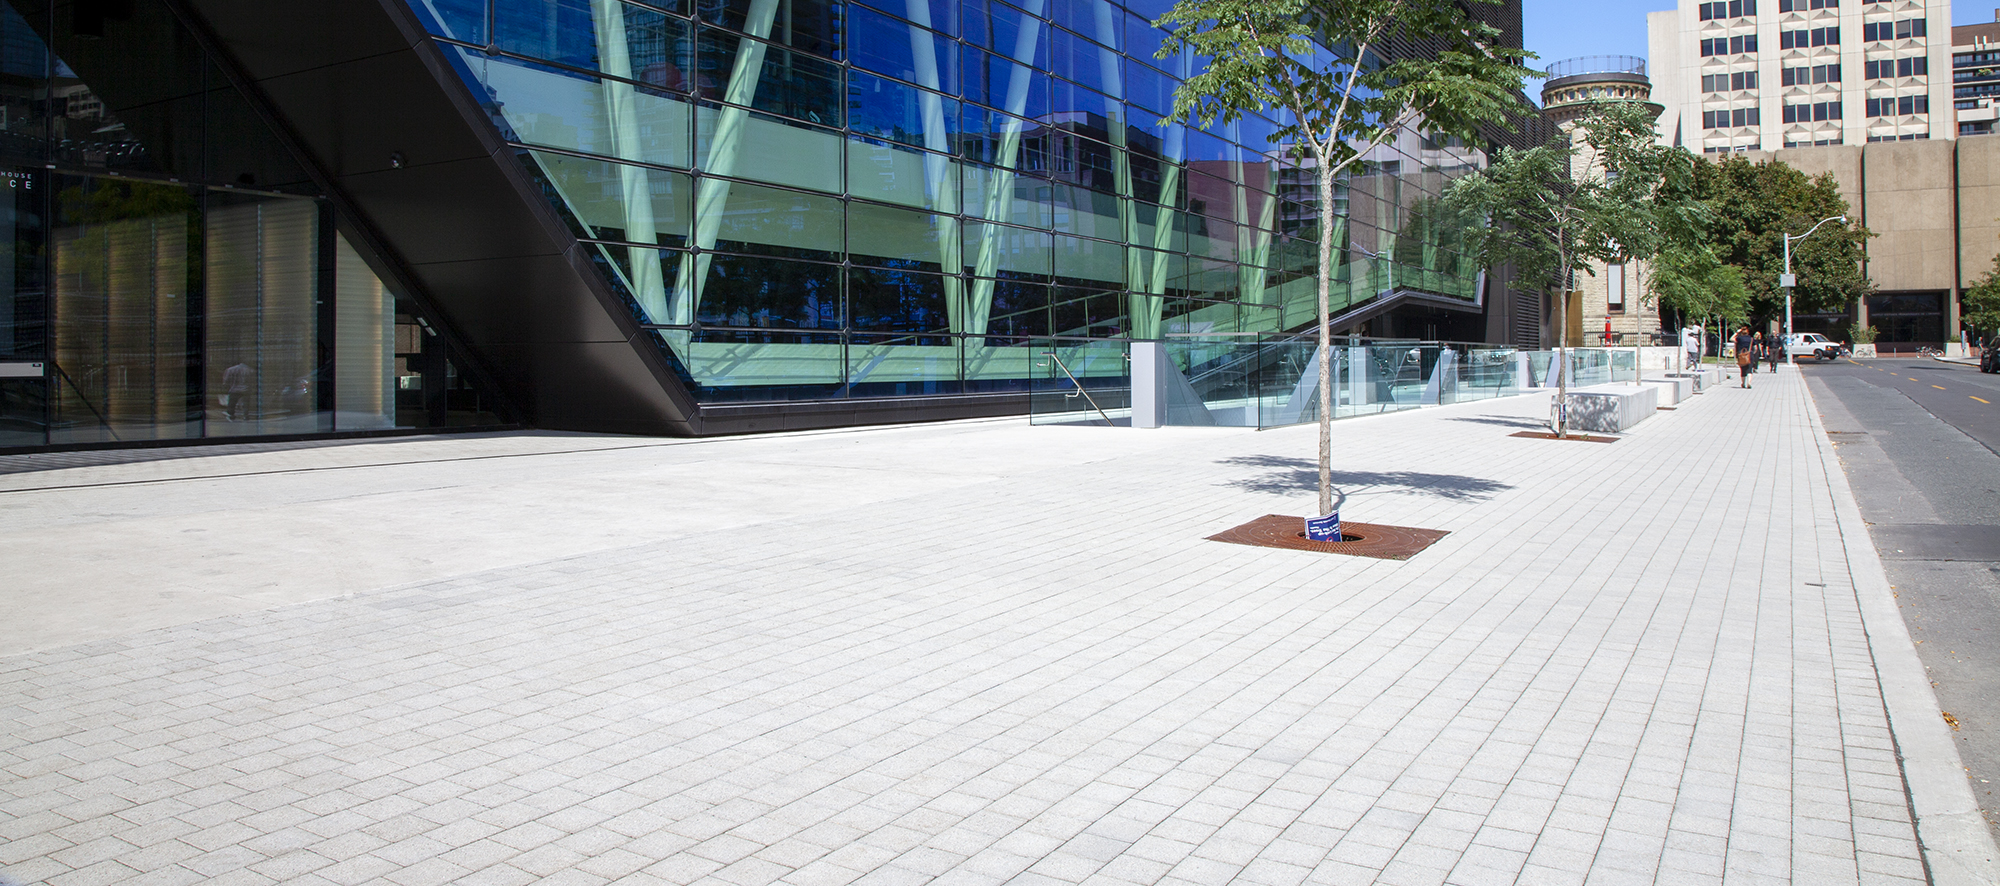 Muted Eco-Optiloc pavers elevate the visual appeal of nearby trees and the glass architecture of the student center.